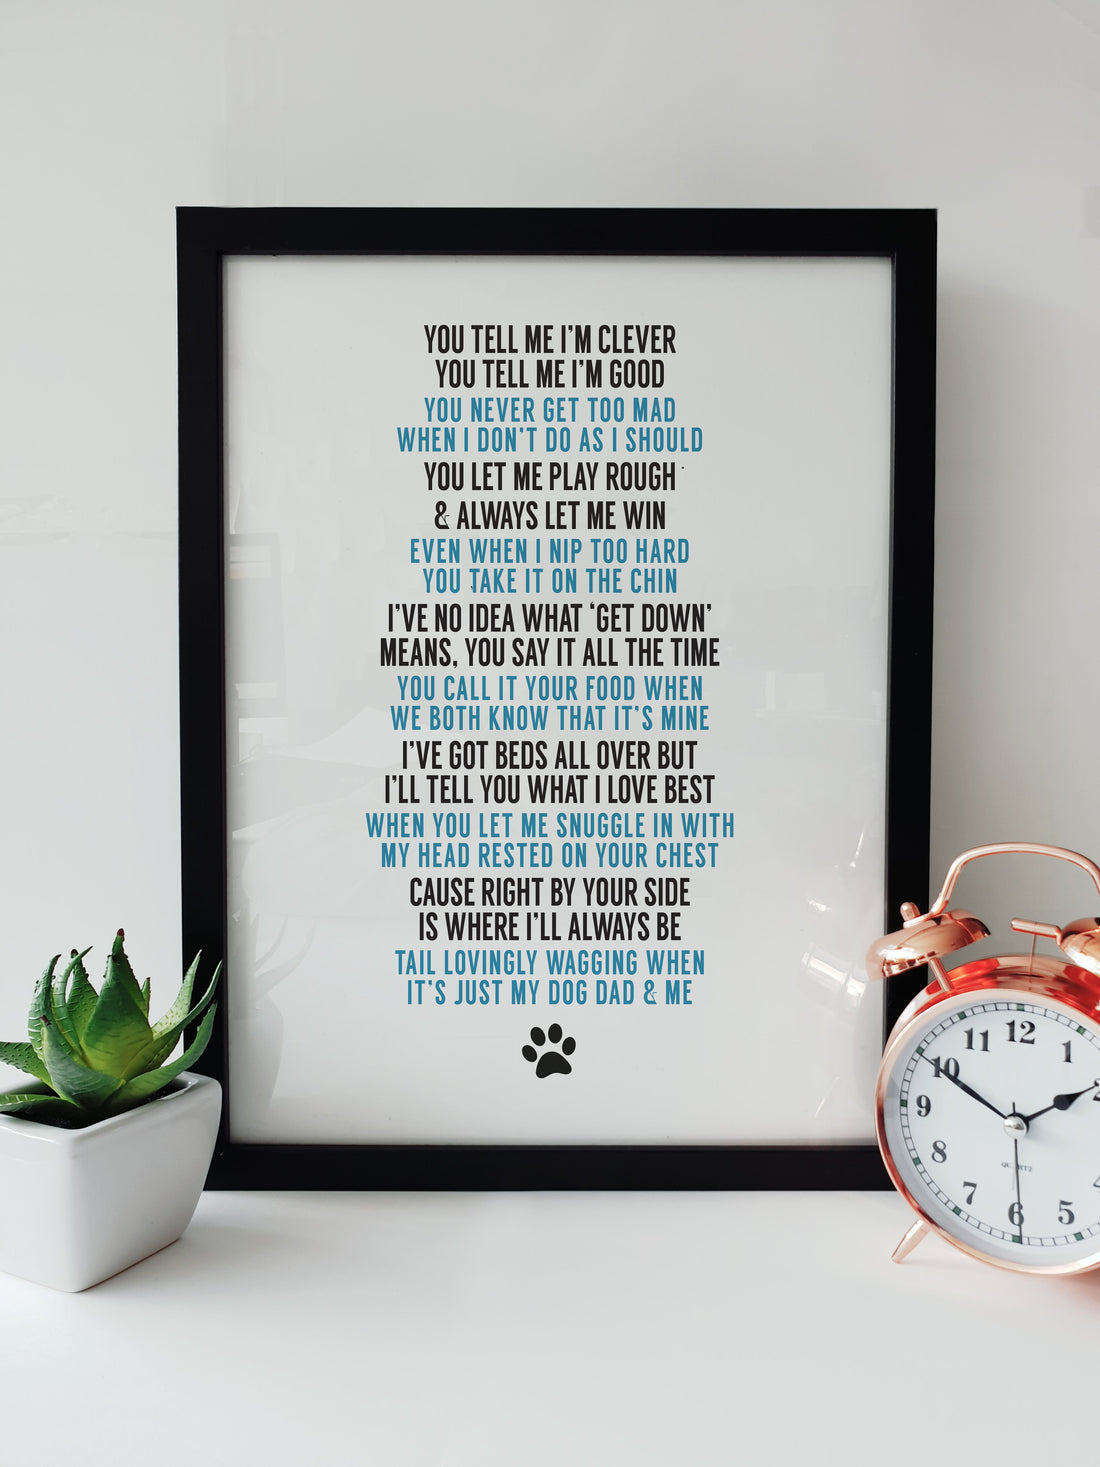 Framed print with a heartfelt poem for a dog dad, perfect for Father's Day or any occasion, displayed on a white desk next to a plant and a copper alarm clock. DESIGNED BY LOCAL LINGO